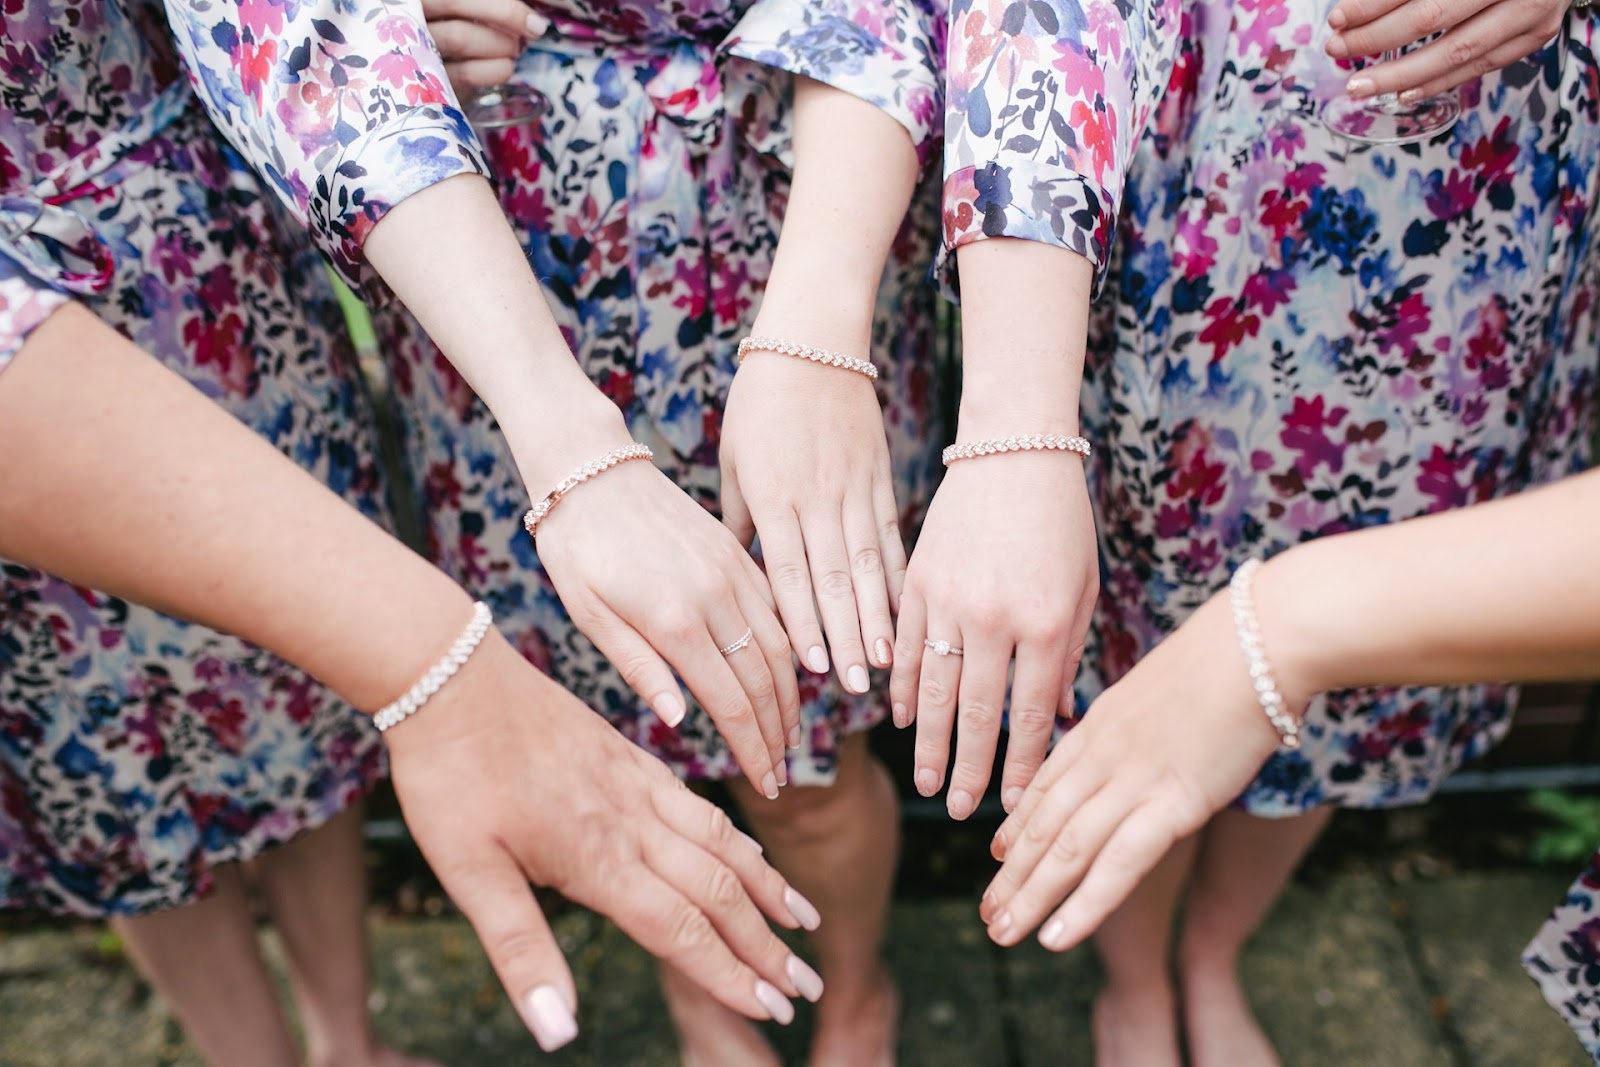 Bridesmaids in matching dresses showing off their bracelets.
Matching jewelry can make a great bridesmaid gift if you want them all to wear it on the wedding day.
  